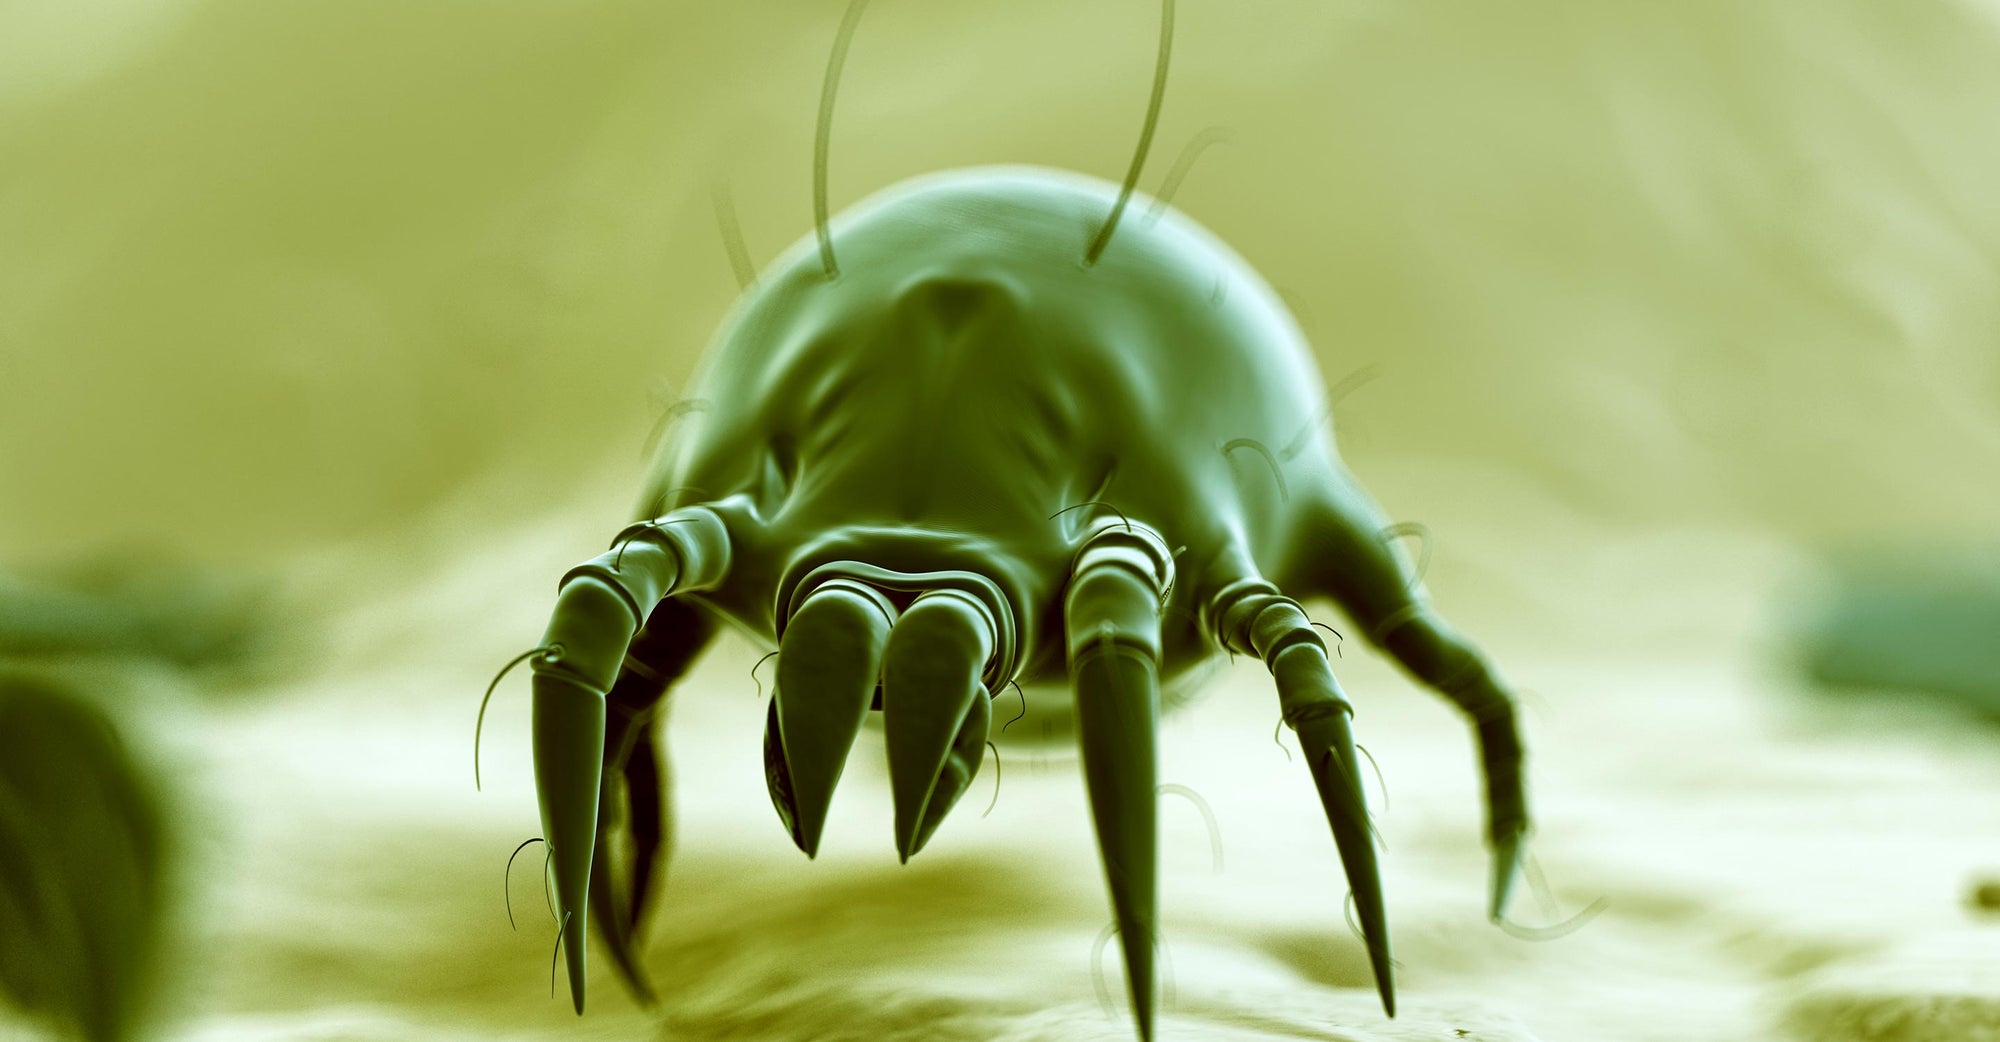 A close up of a dust mite.